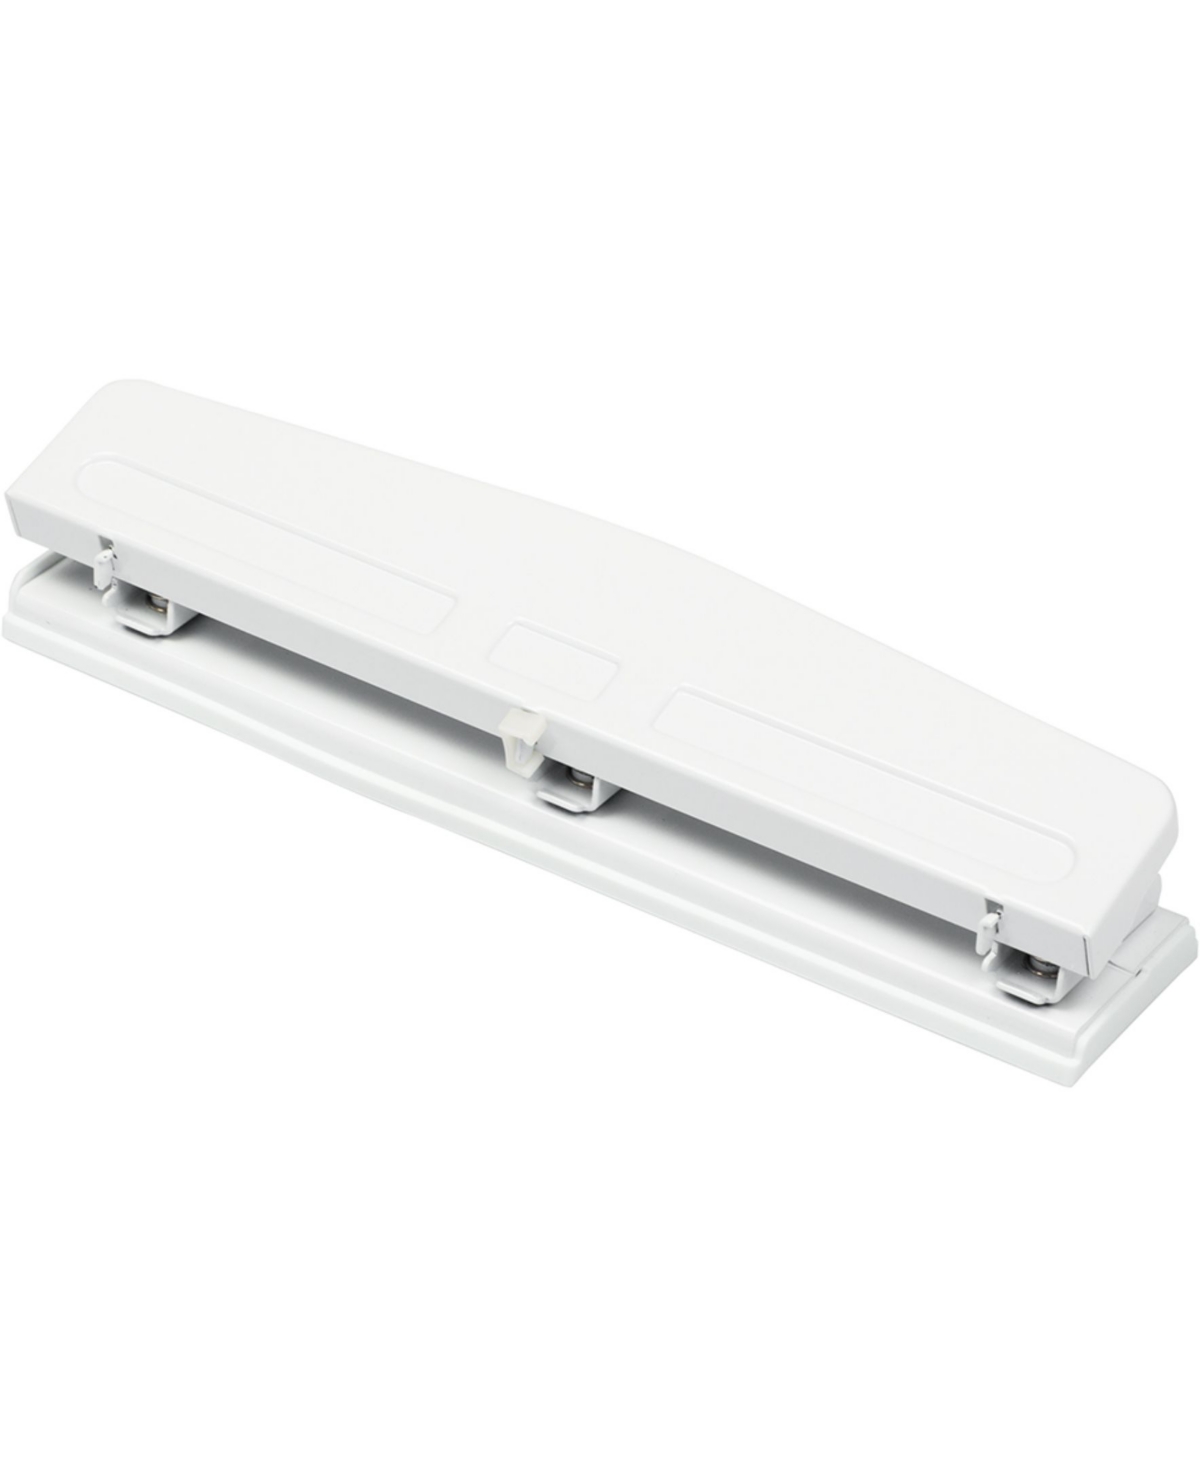 Metal 3 Hole Punch - 10 Sheet Capacity - Hole Puncher Sold Individually - White